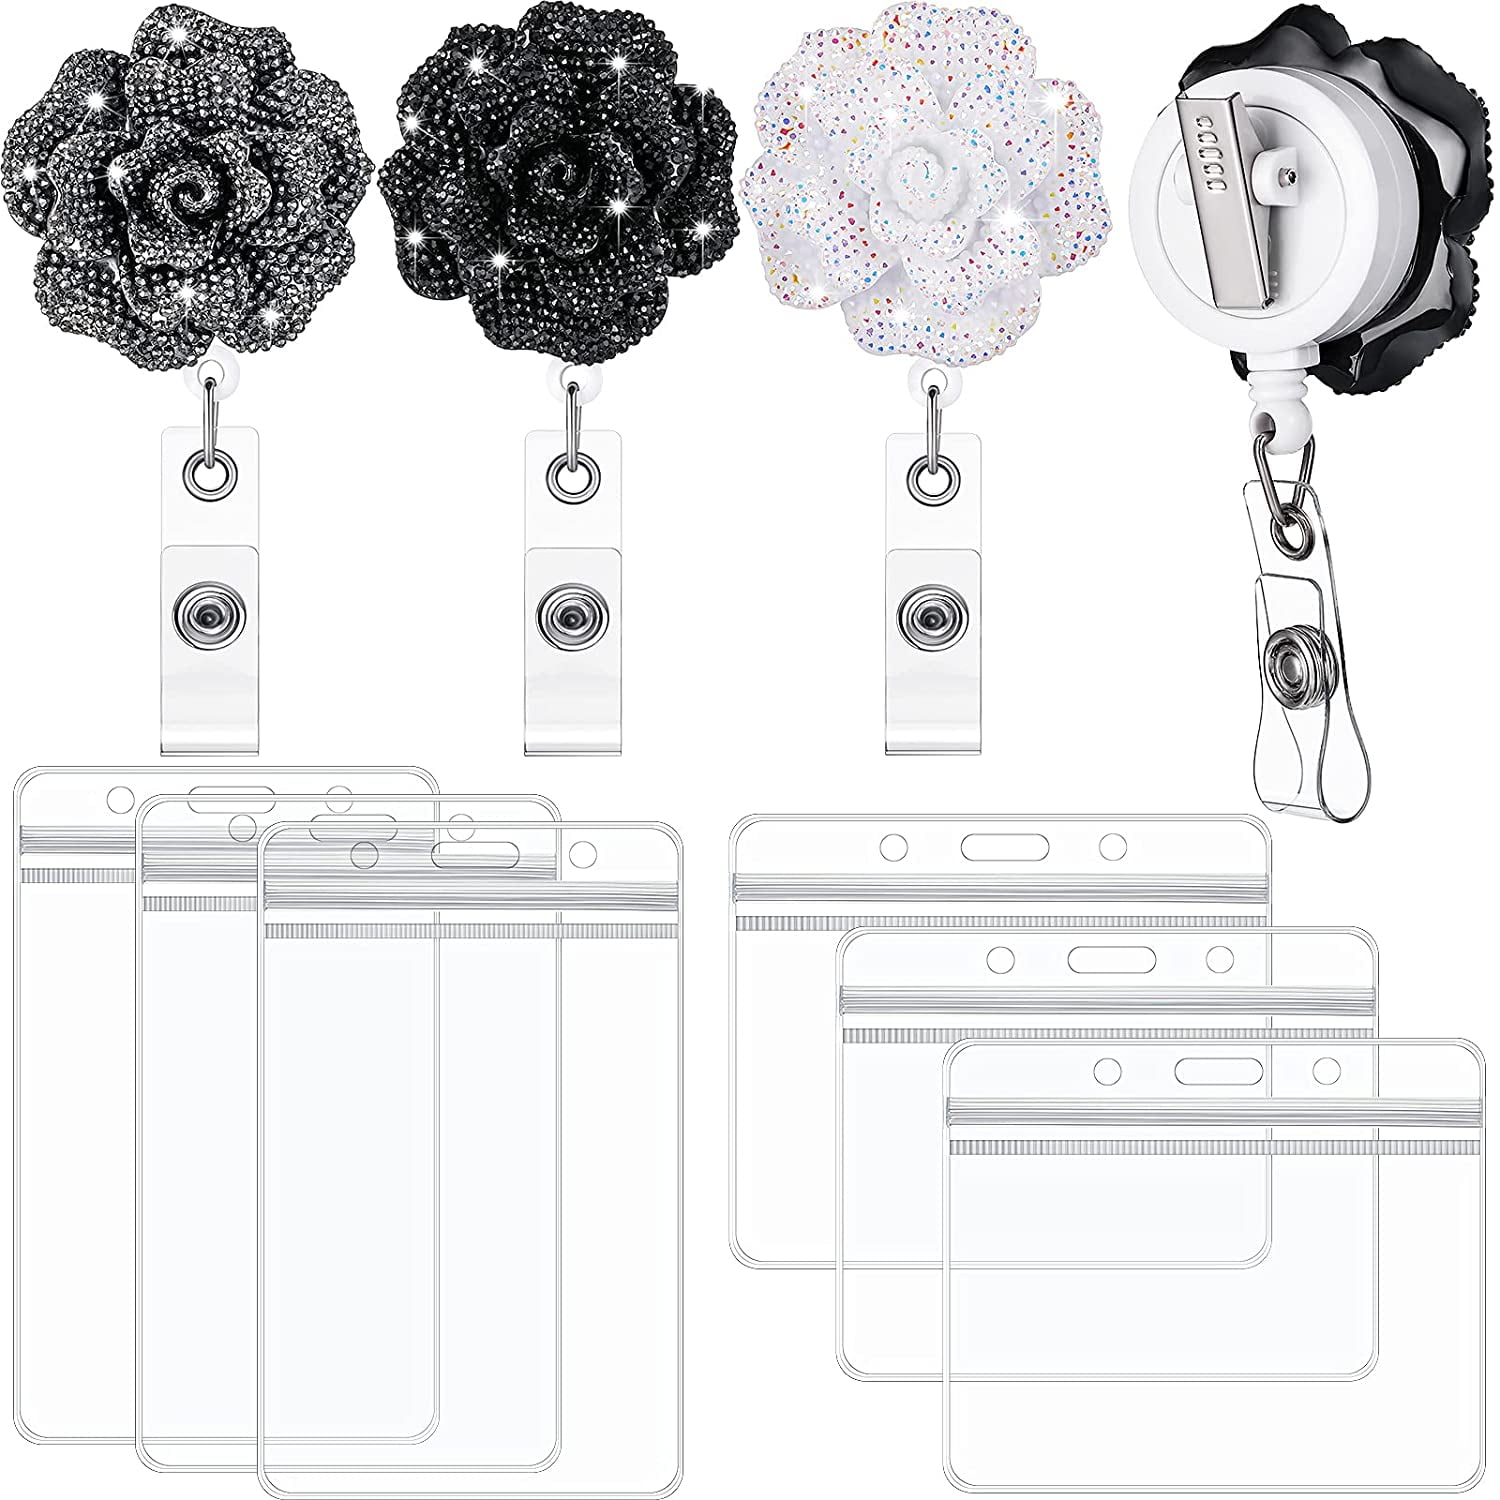 3 Pieces 24 Inch Retractable Badge Reels Rose Nurse ID Badge Holder Reel with 360 Degree Swivel Alligator Clip and Clear Card Holder for Office Worker Doctor Nurse Student 